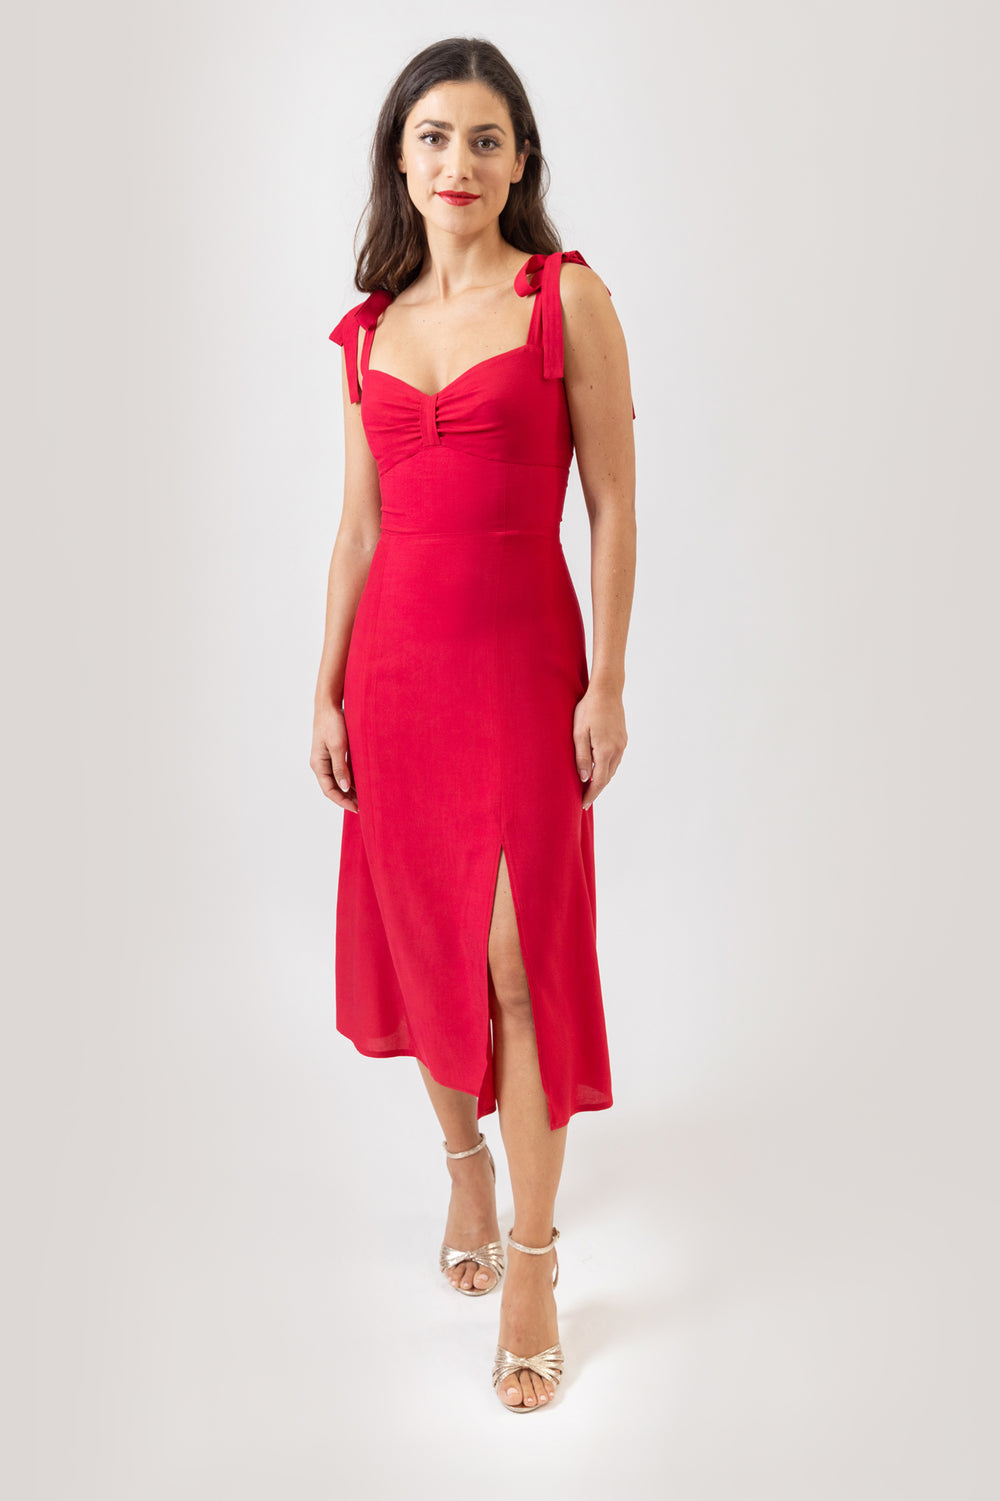 Women wearing the Chloe Dress sewing pattern from Sew Love Patterns on The Fold Line. A dress pattern made in viscose, tencel, crepe, velvet, satin rayon and cotton fabrics, featuring tied shoulder straps, close fitting, midi length with front slit, low s